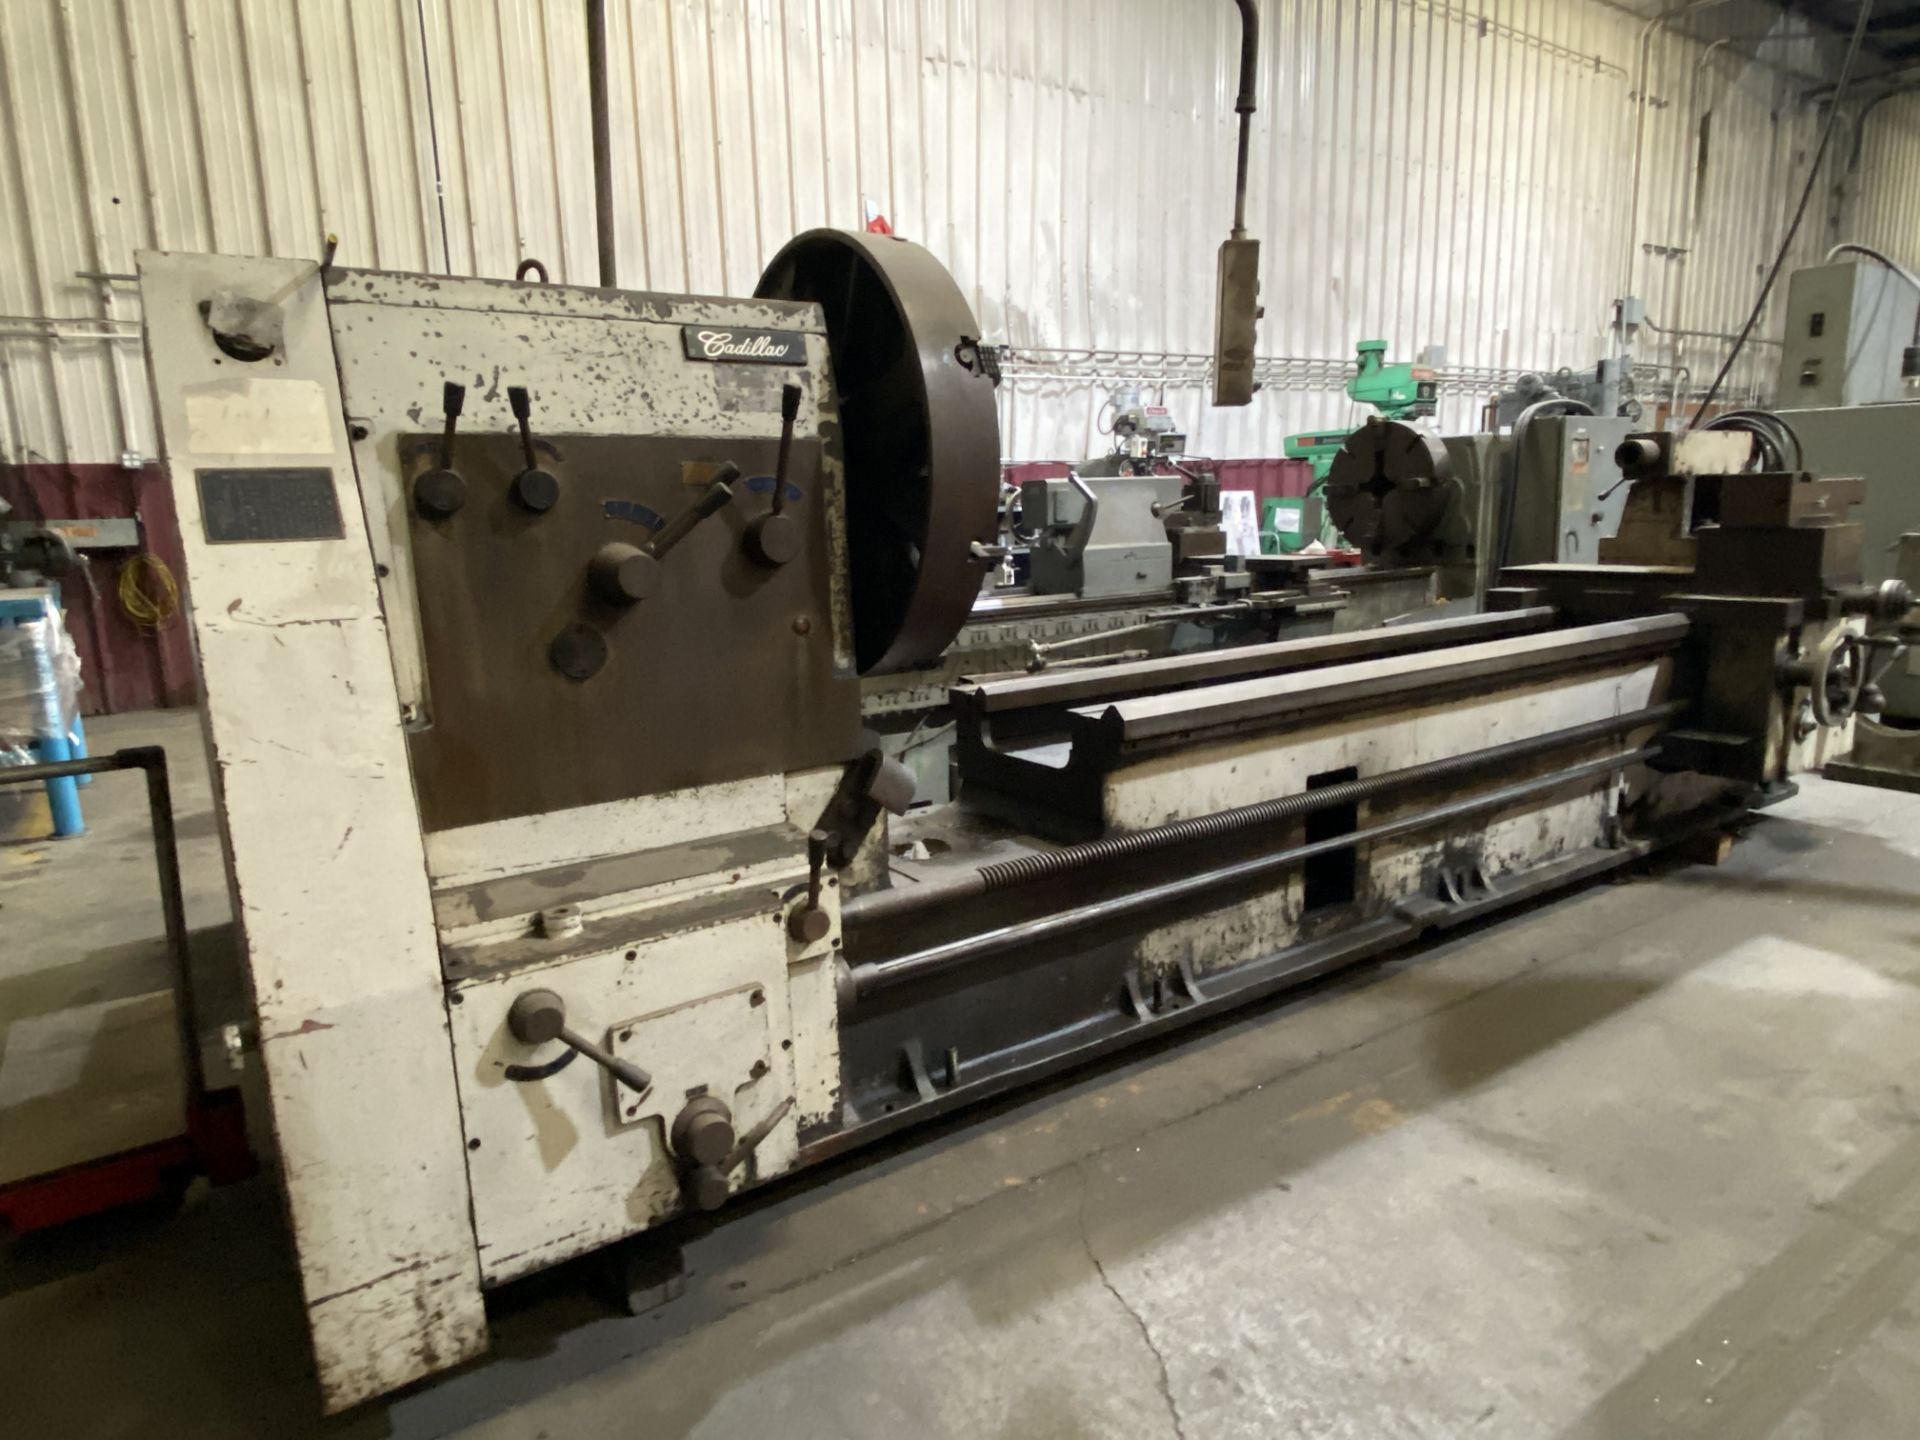 CADILLAC GAP BED ENGINE LATHE, MODEL 32120, 32" X 120", 42" SWING IN GAP, TAILSTOCK, S/N 267014 - Image 2 of 10